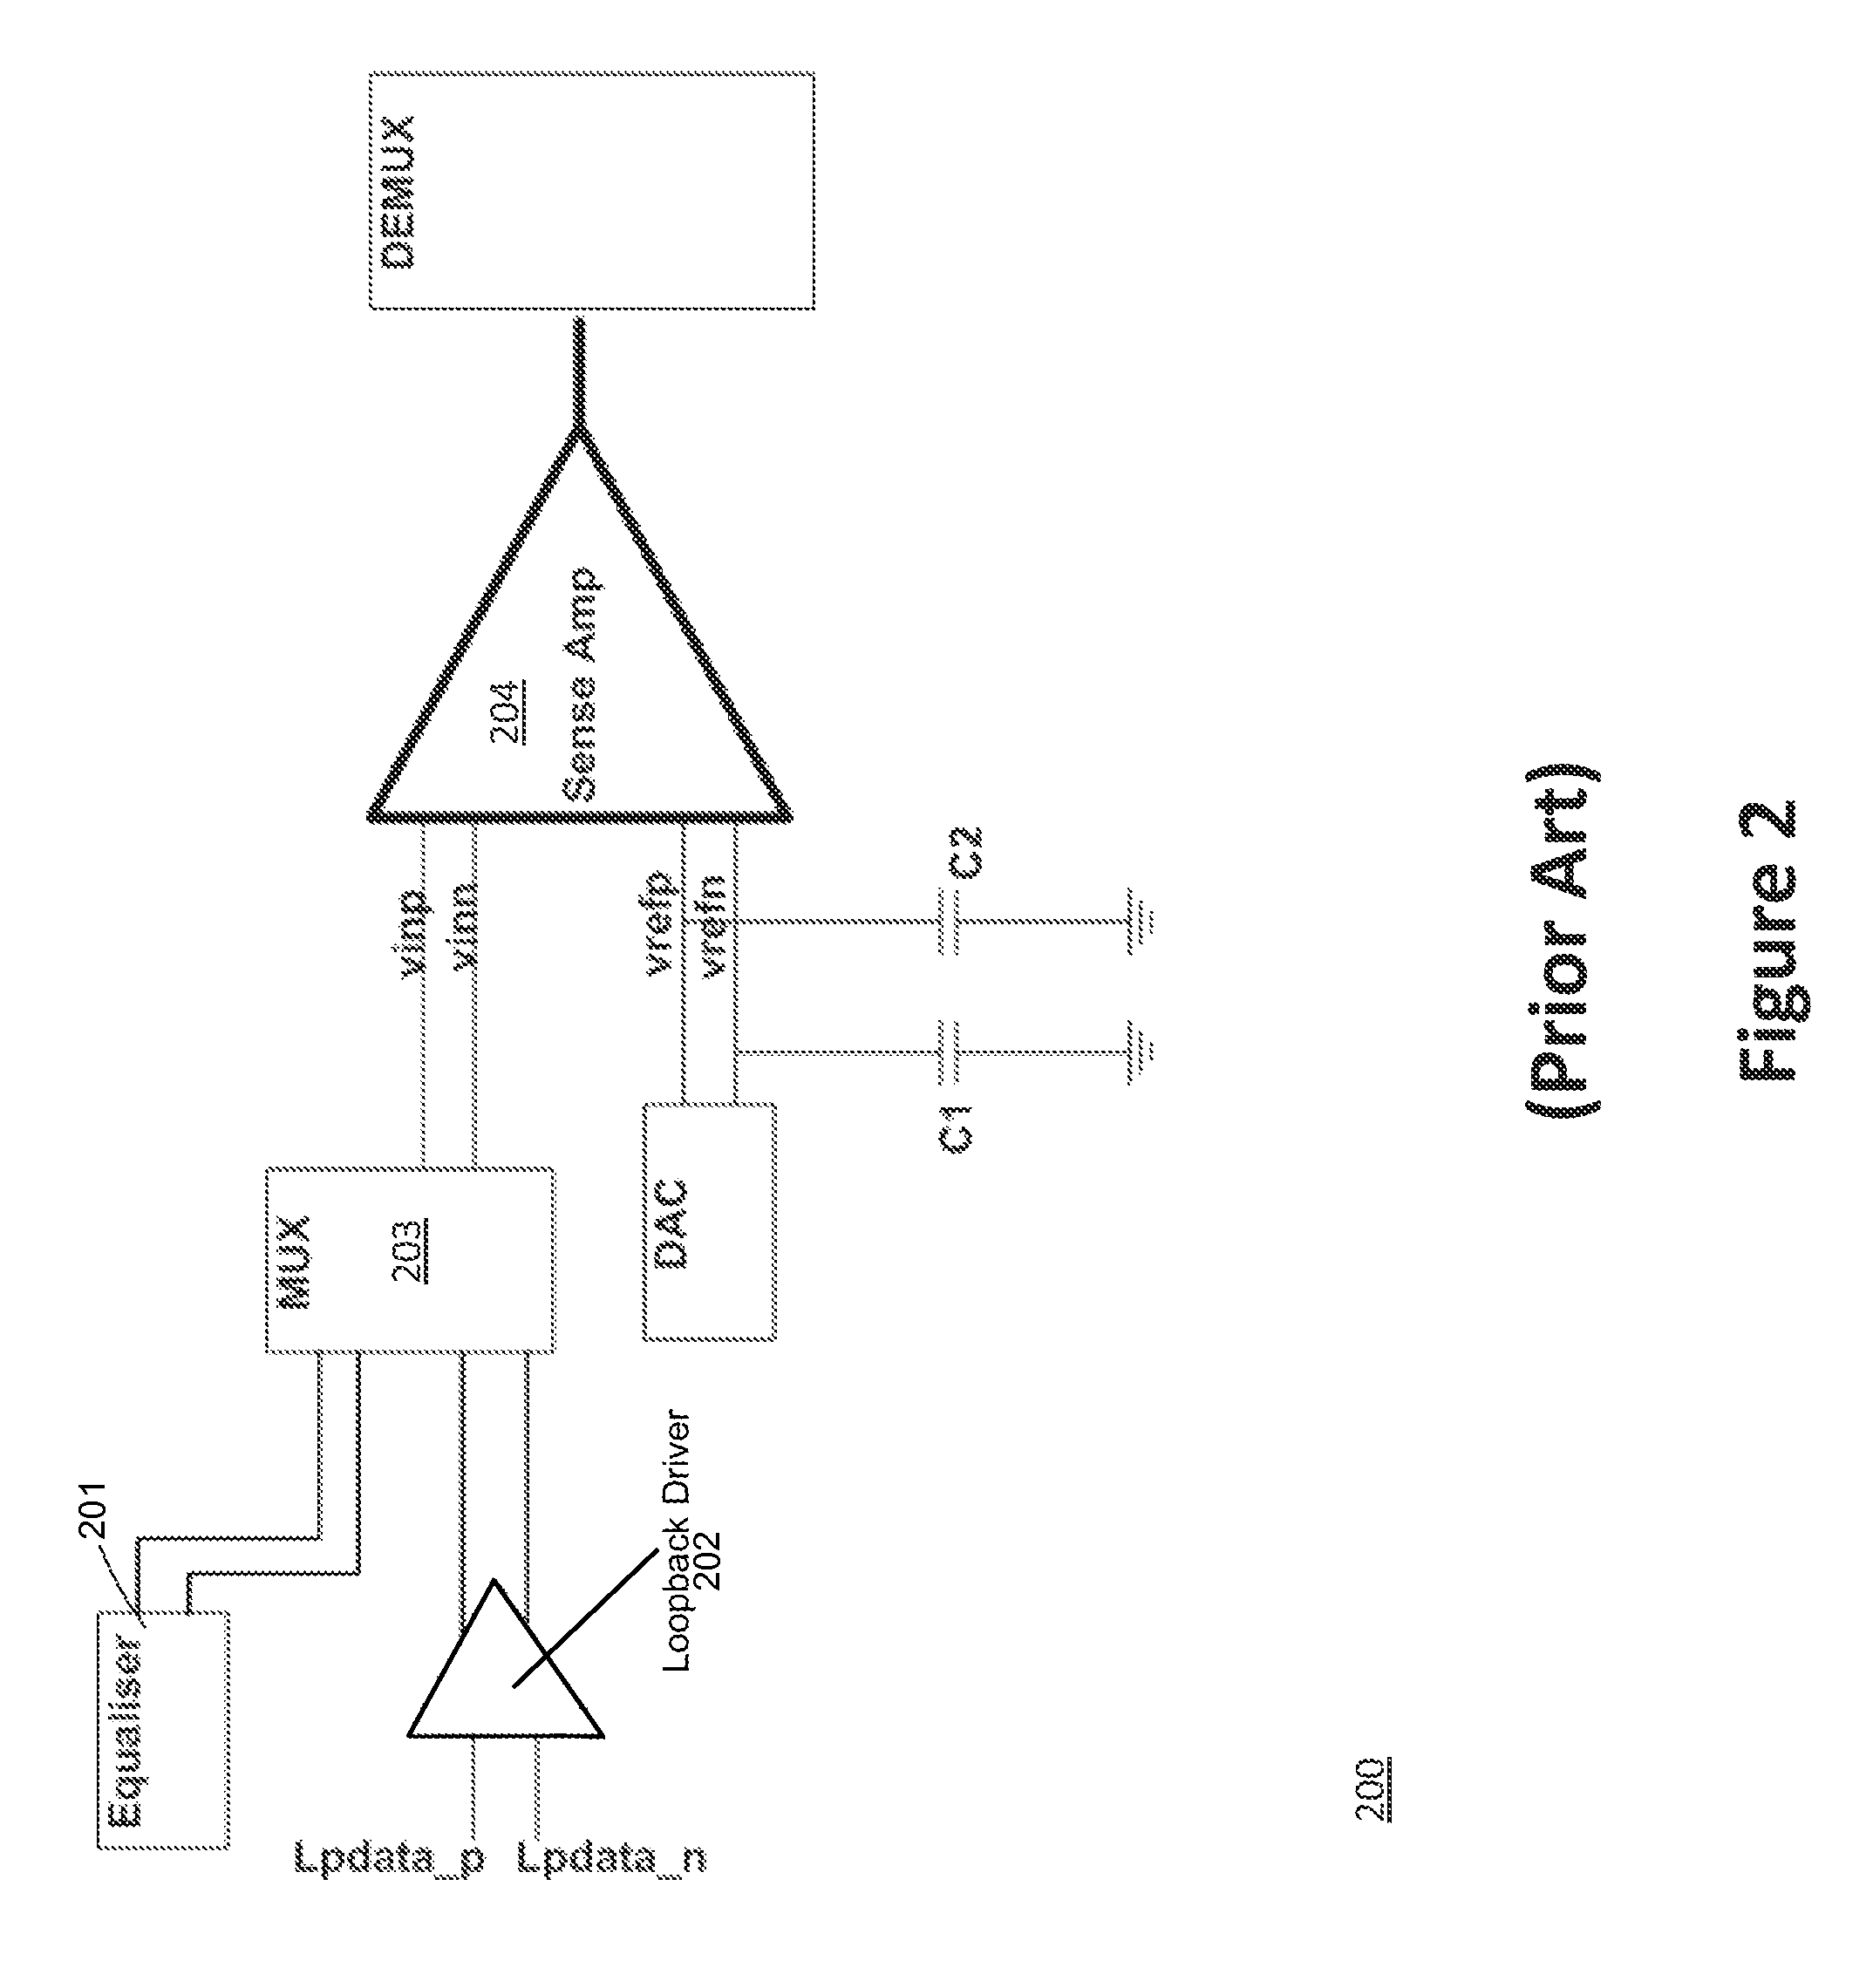 Serializer/deserializer apparatus with loopback configuration and methods thereof